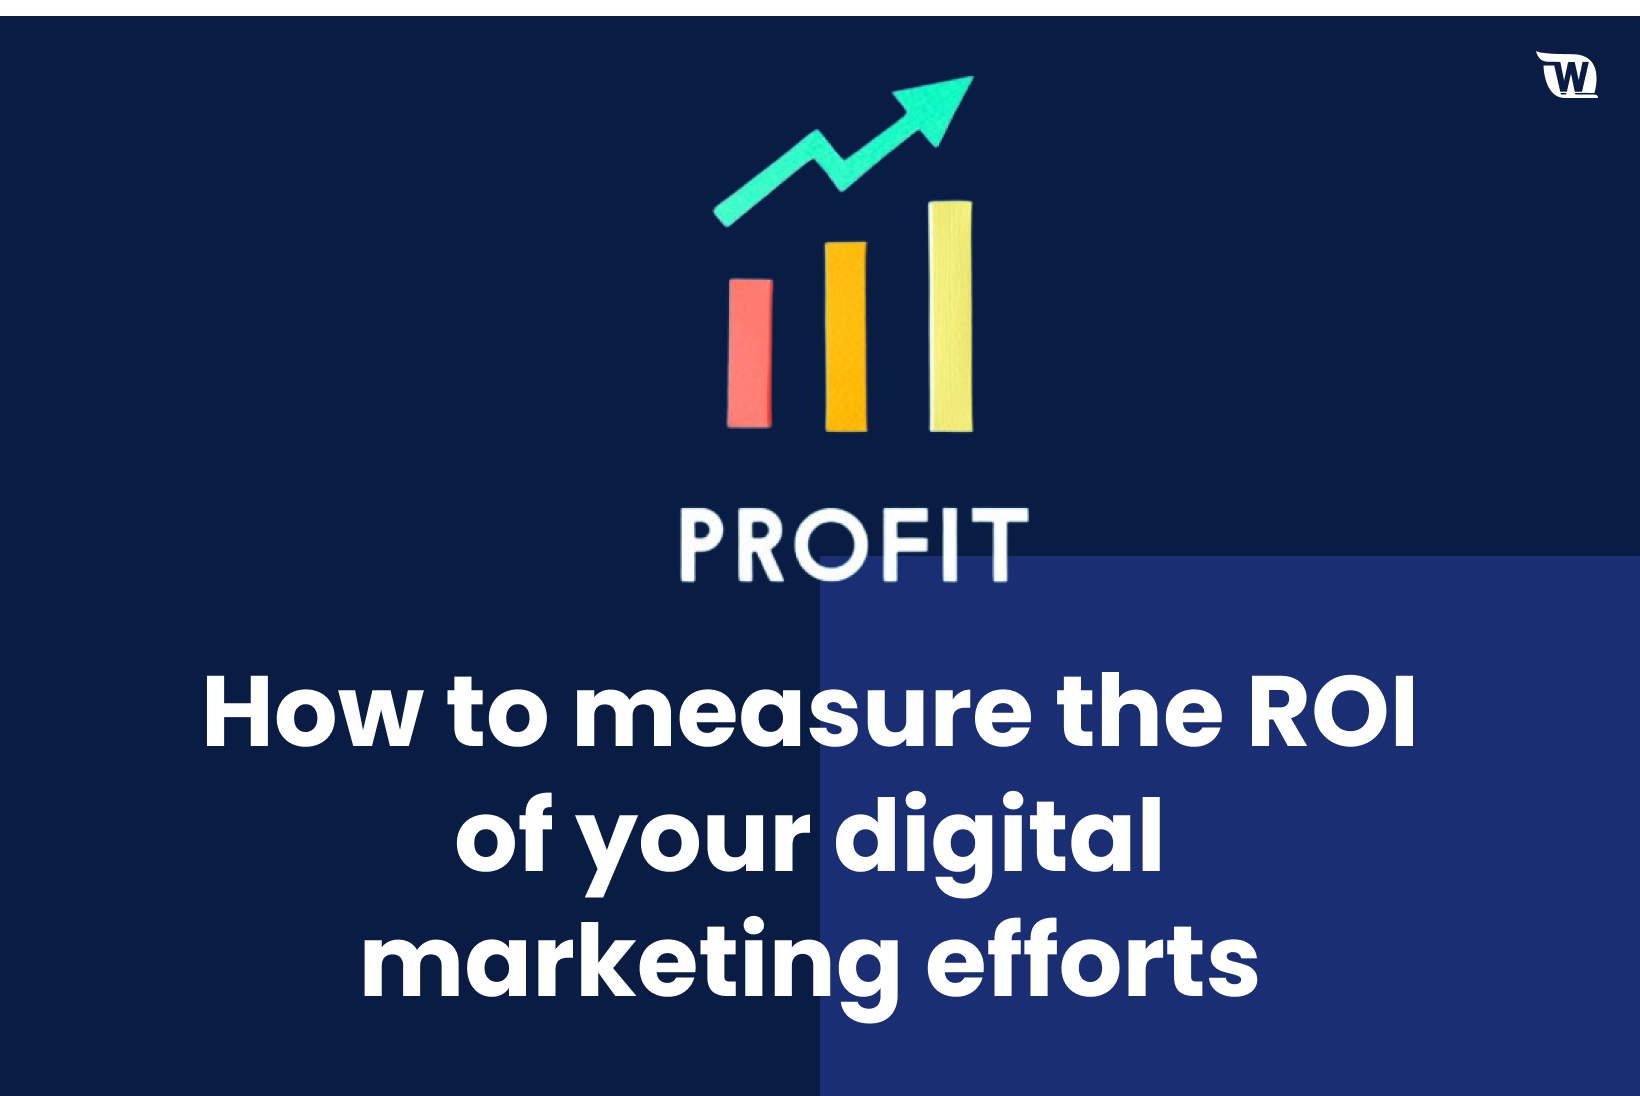 How to measure the ROI of your digital marketing efforts